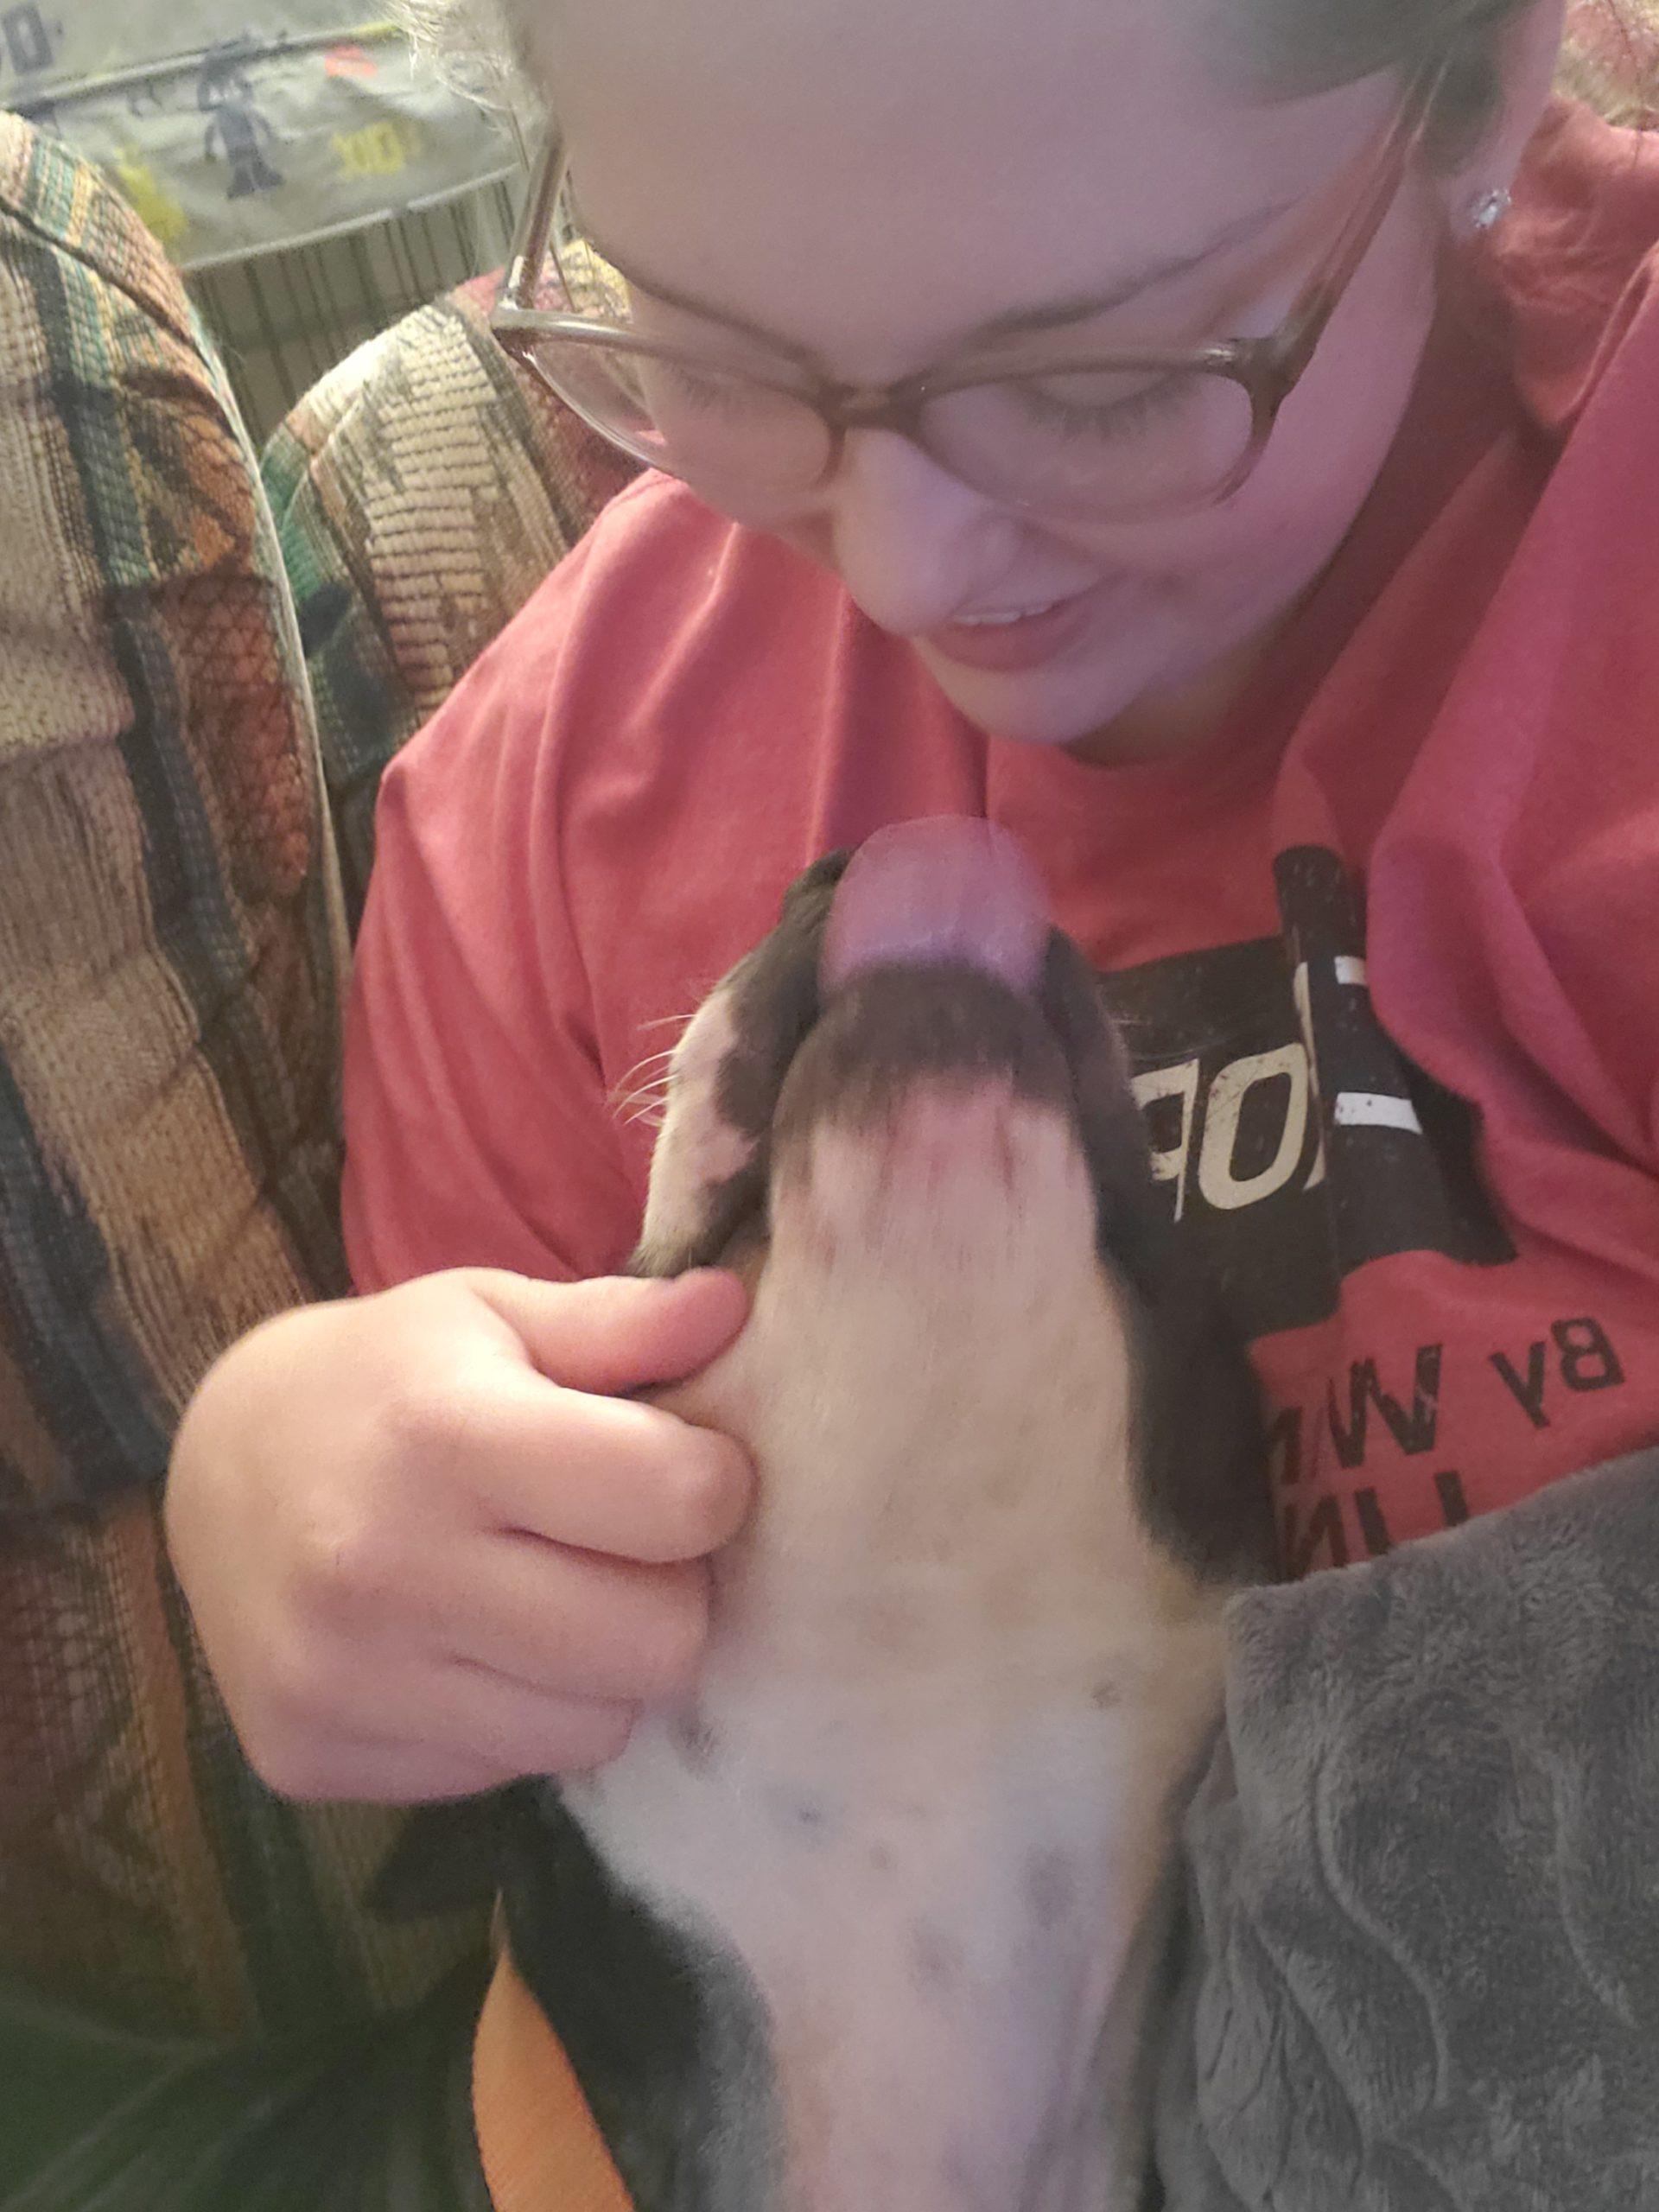 A dog is mid-lick, trying to slurp a woman's face.